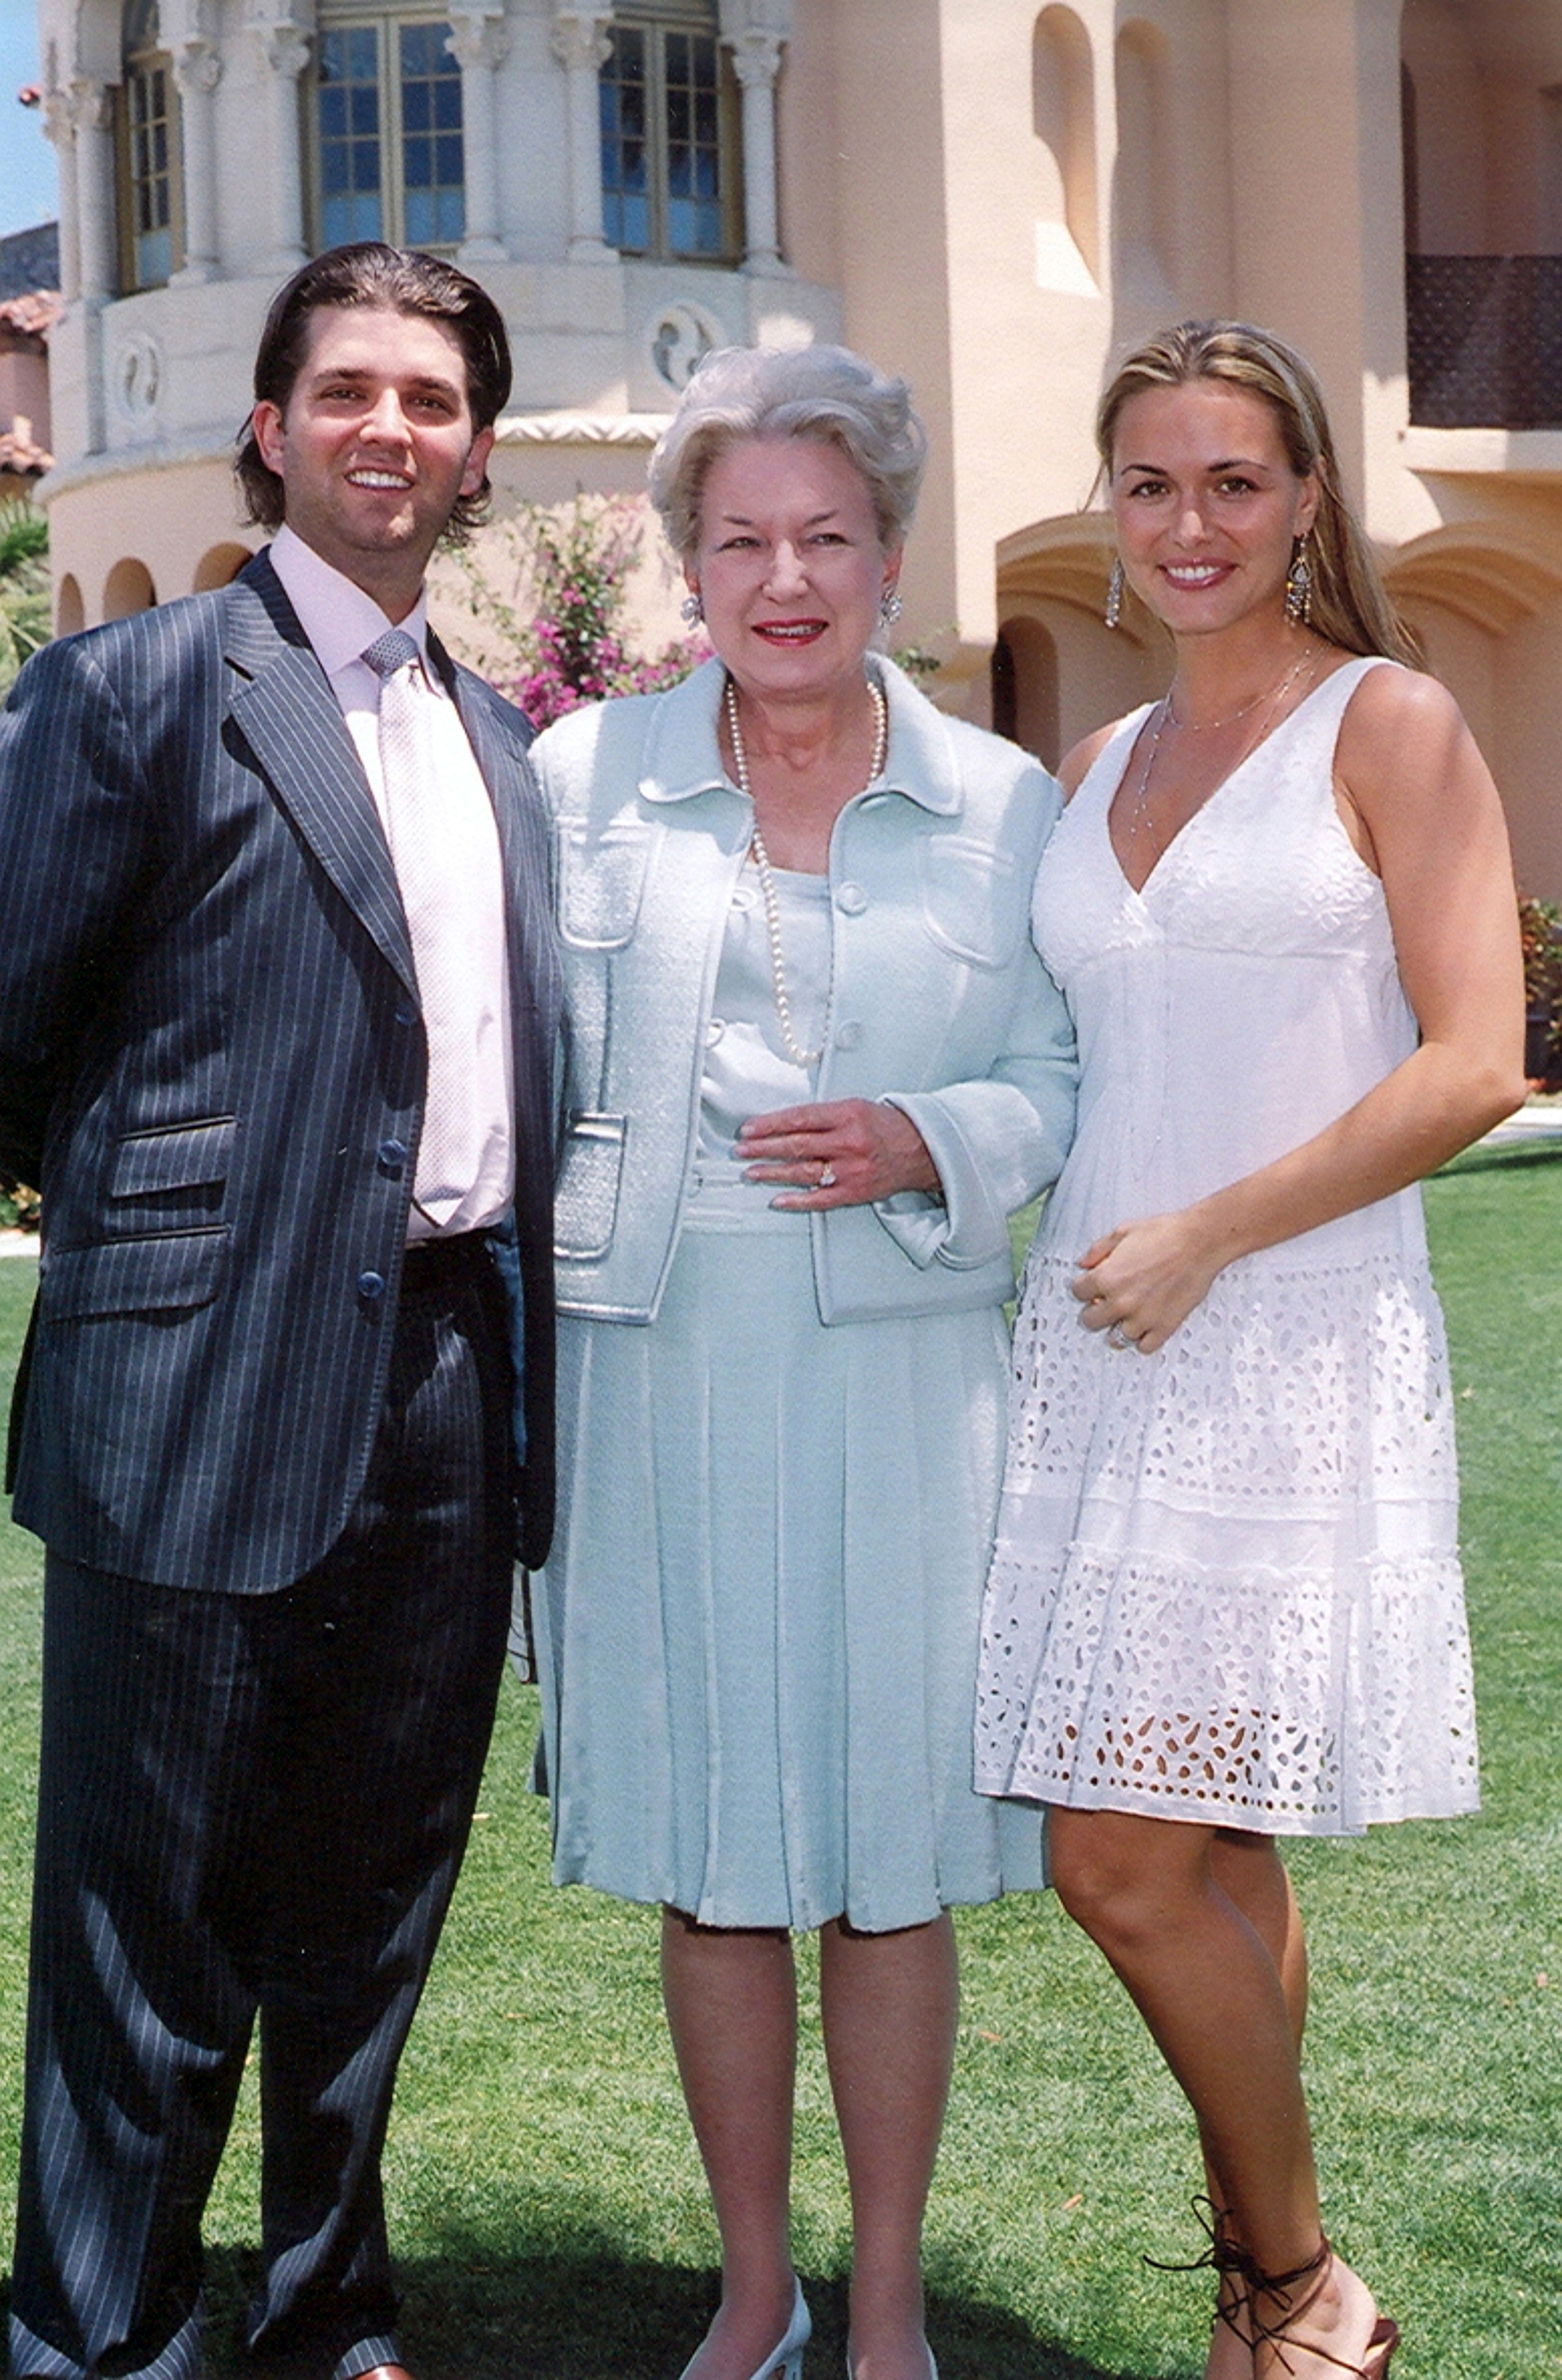 Left to right, Donald Trump Jr, Judge Maryanne Trump Barry, and Vanessa Kay Haydon Trump pose for a portrait during Easter Sunday events at the Mar-a-Lago club in Palm Beach, Florida, April 16, 2006 | Source: Getty Images